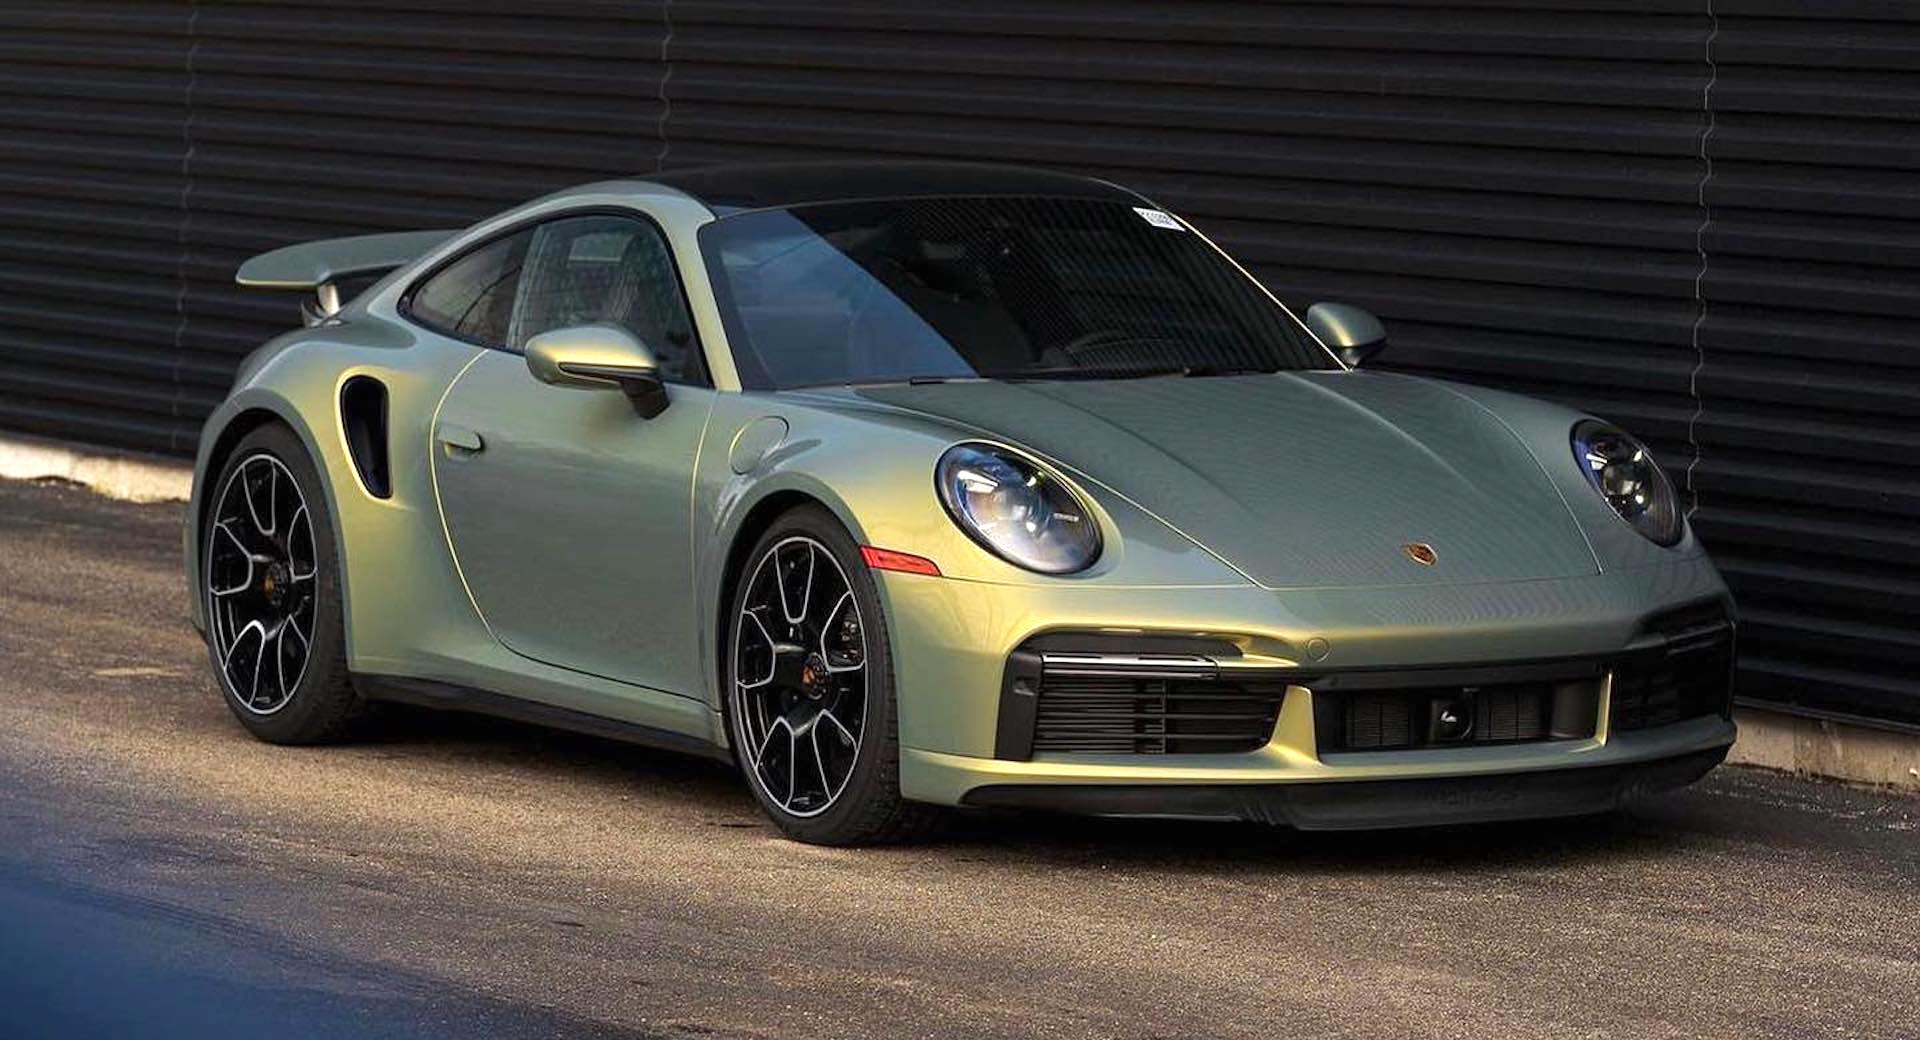 Dealer Puts A $100,000 Markup On New Porsche 911 Turbo S That Has $160,000  Worth Of Options | Carscoops